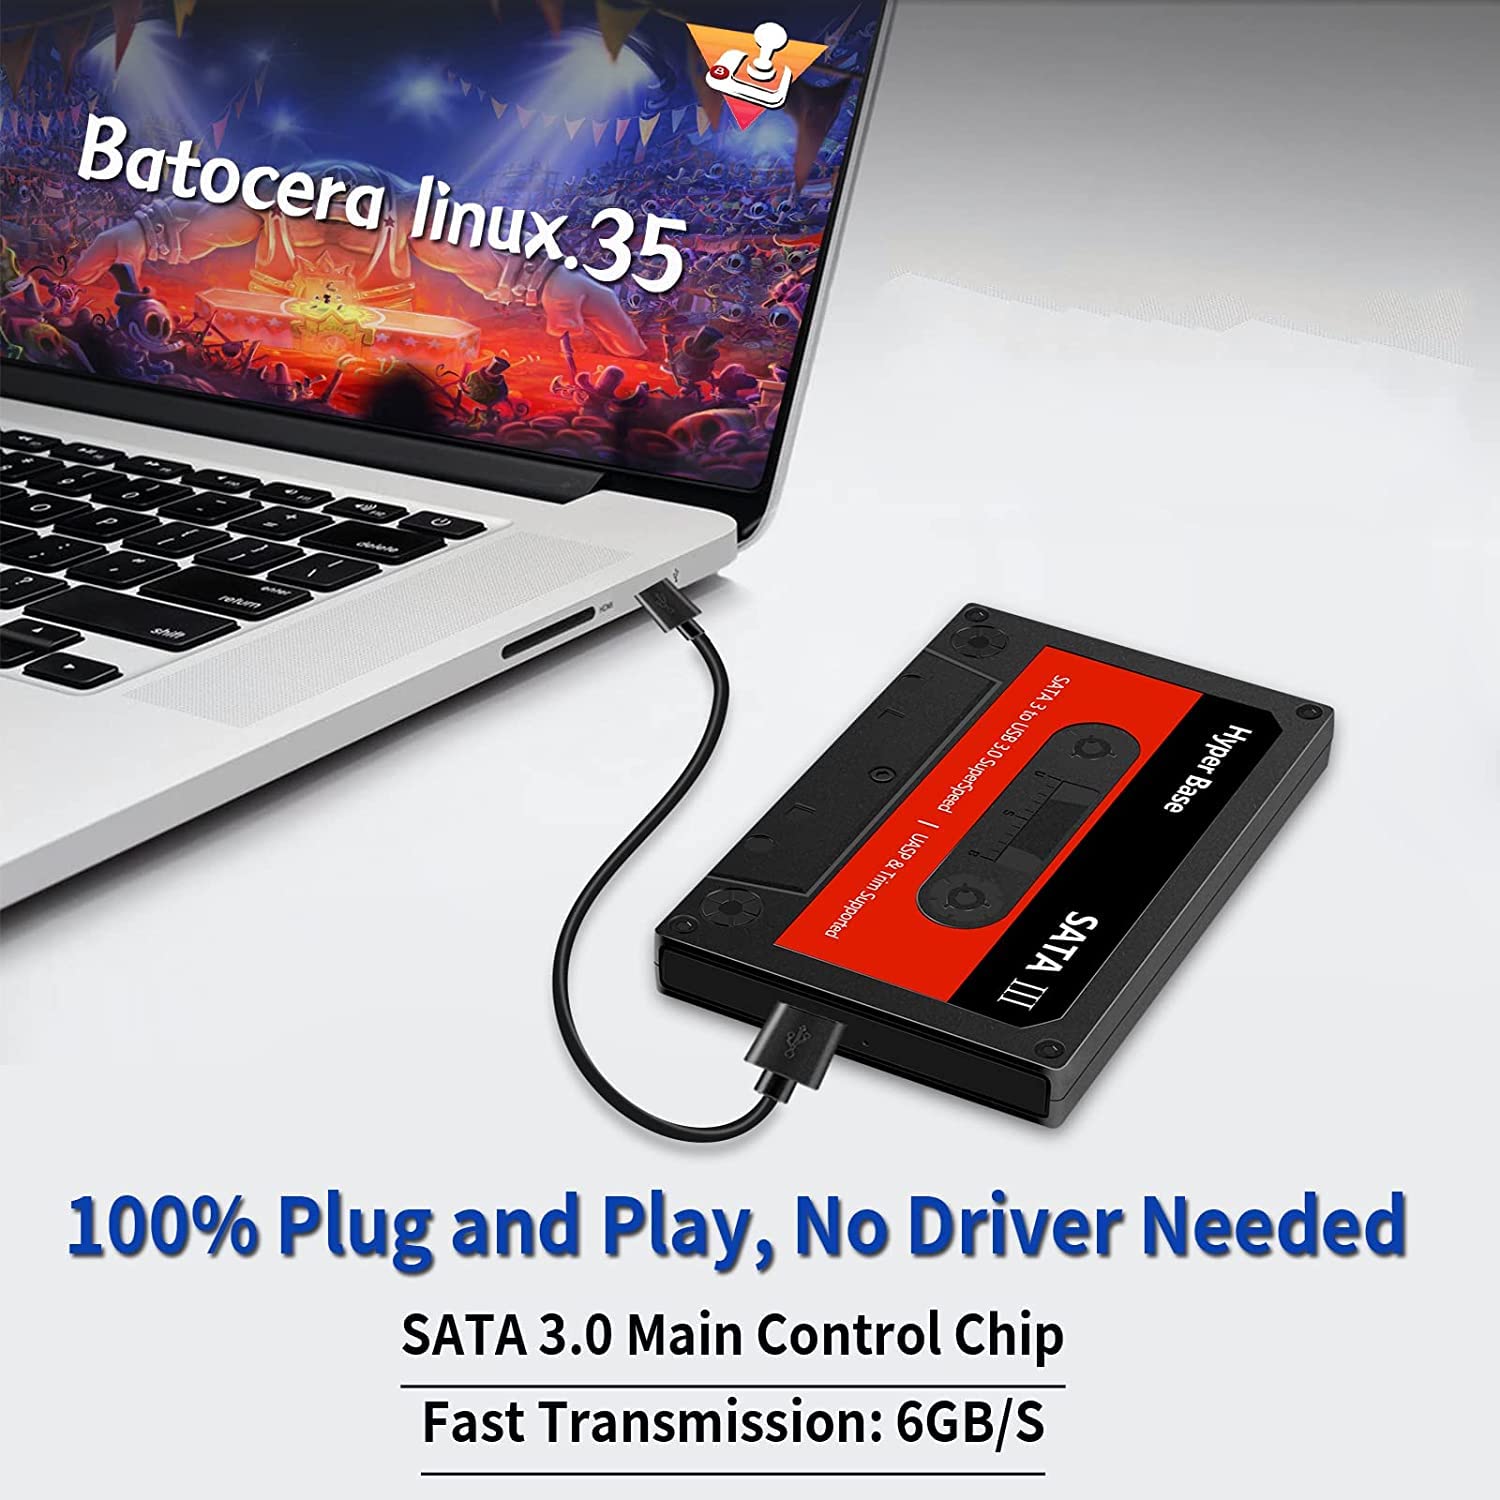 Retro Game Console with 48045 Classic Games, Batocera 35 Game System, Emulator Console Compatible with PSP/Atari/MAME/C64/Sega, USB 3.0 to Sata 3, 500G Game HDD Plug and Play for Windows PC/Mac